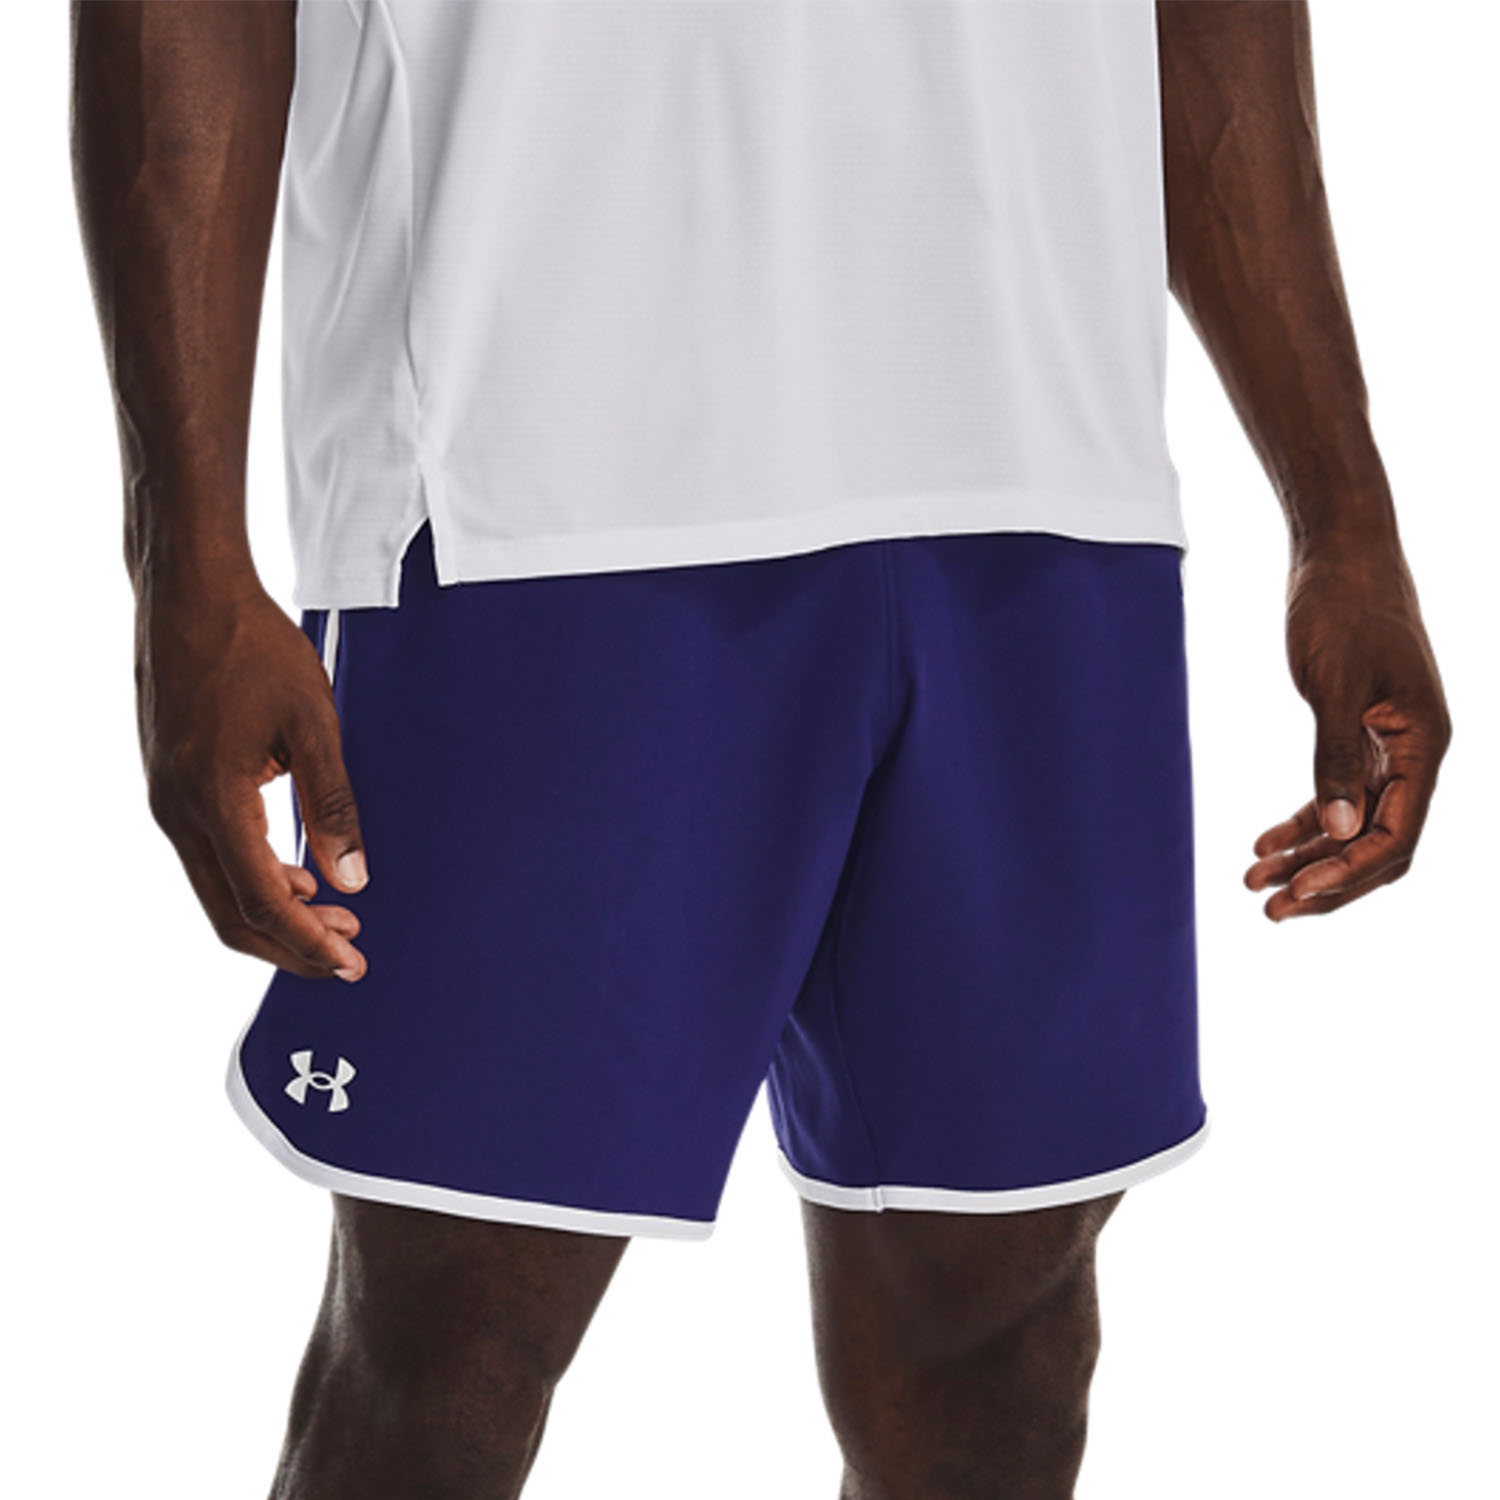 Under Armour HIIT Woven 8in Shorts - Sonar Blue/White